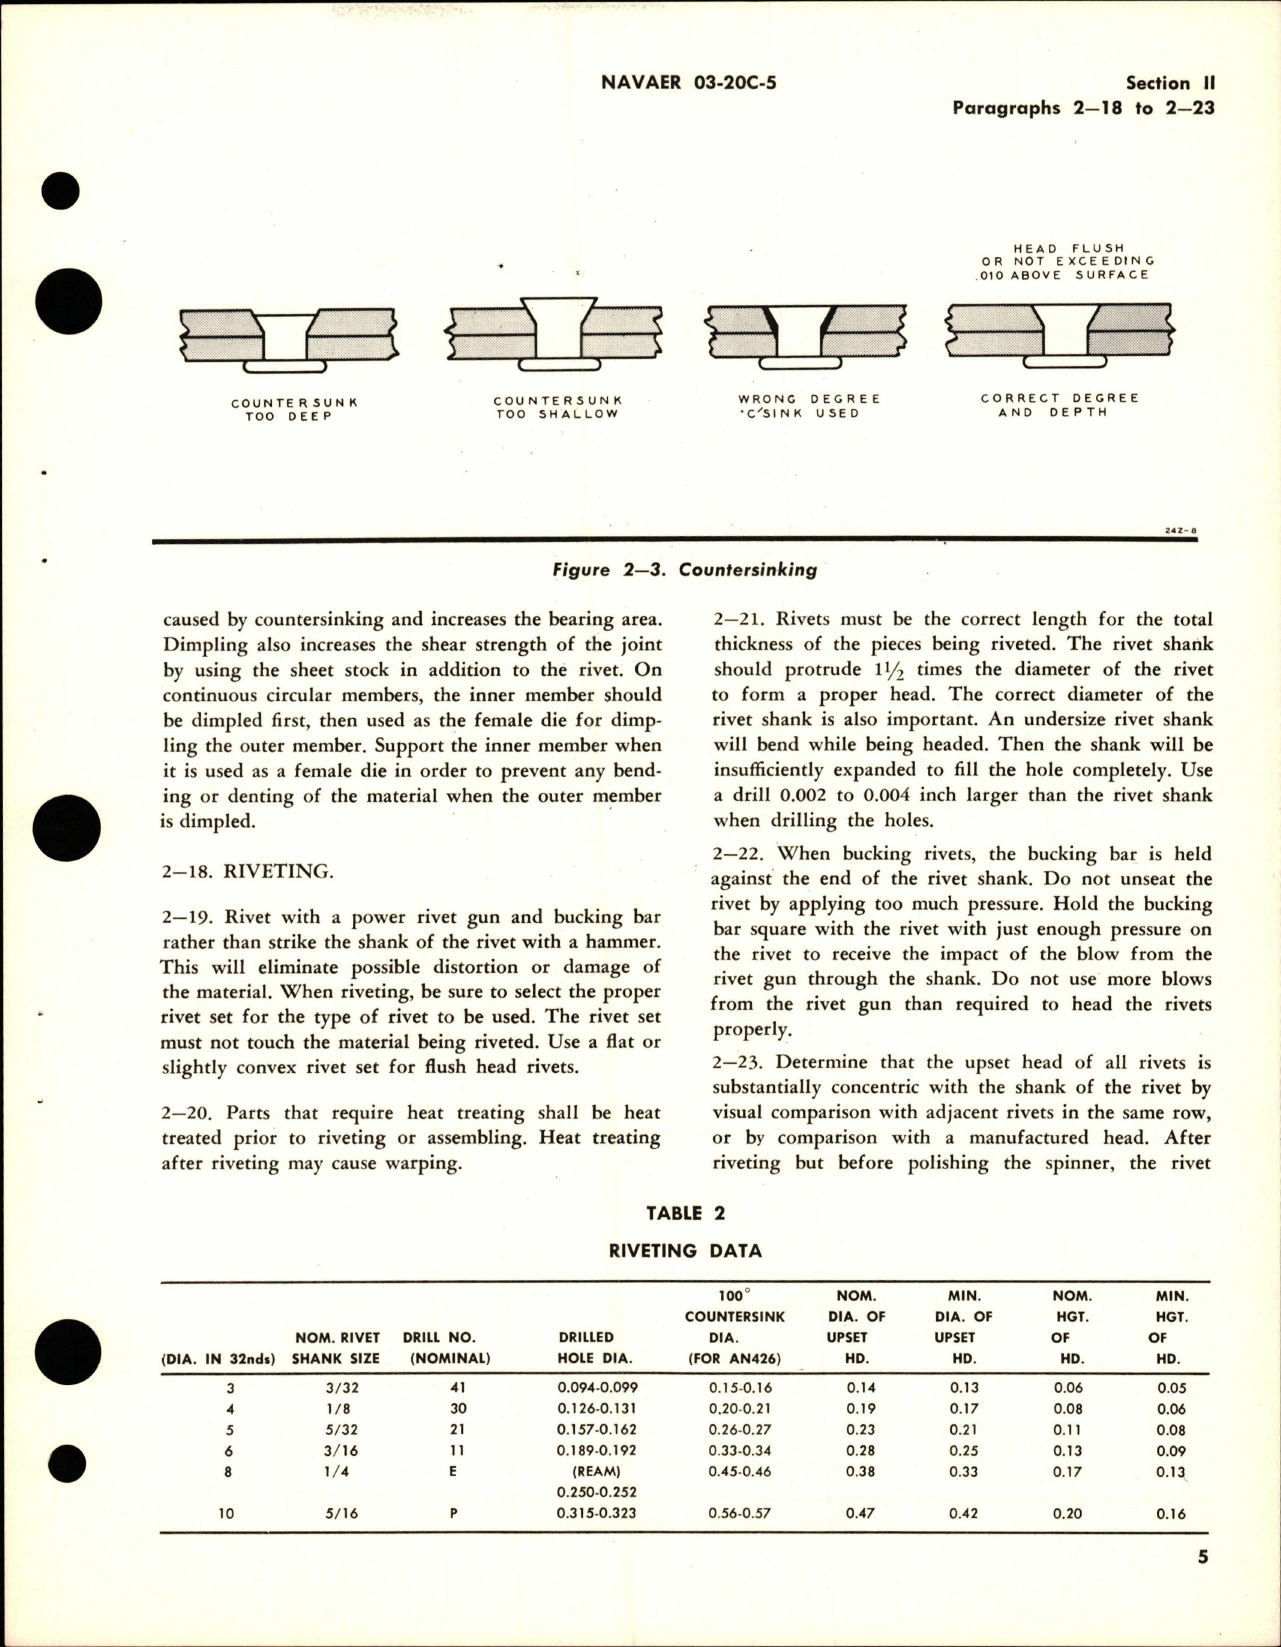 Sample page 9 from AirCorps Library document: Overhaul Instructions for Aircraft Propeller Spinner and Anti-Icing - Assembly No. 535247 